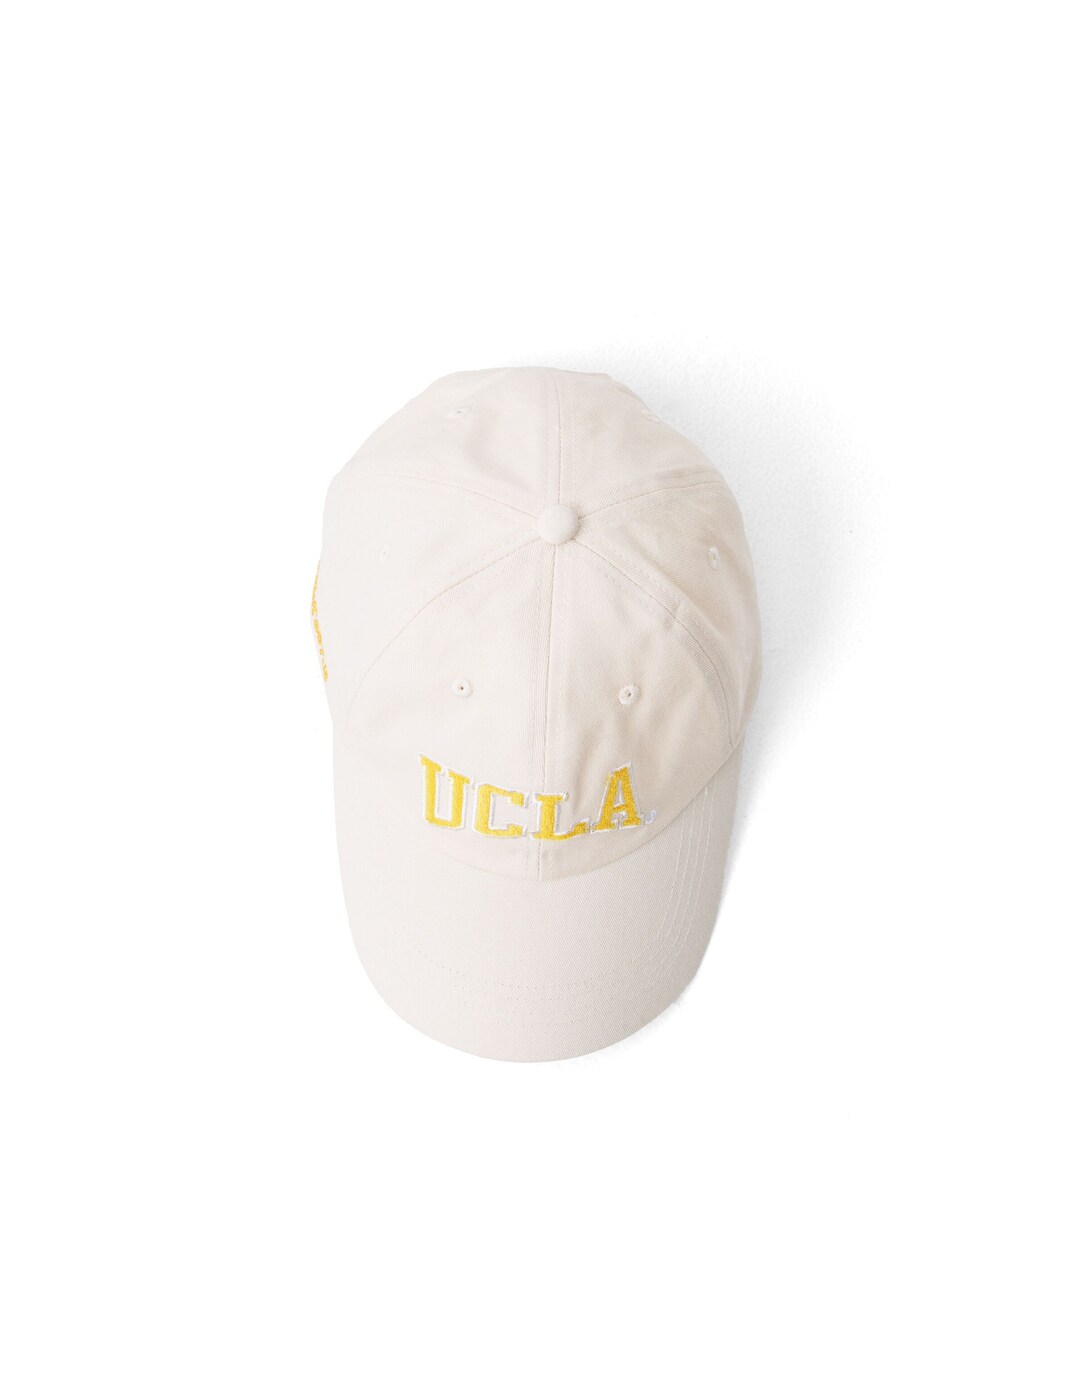 Embroidered UCLA cap